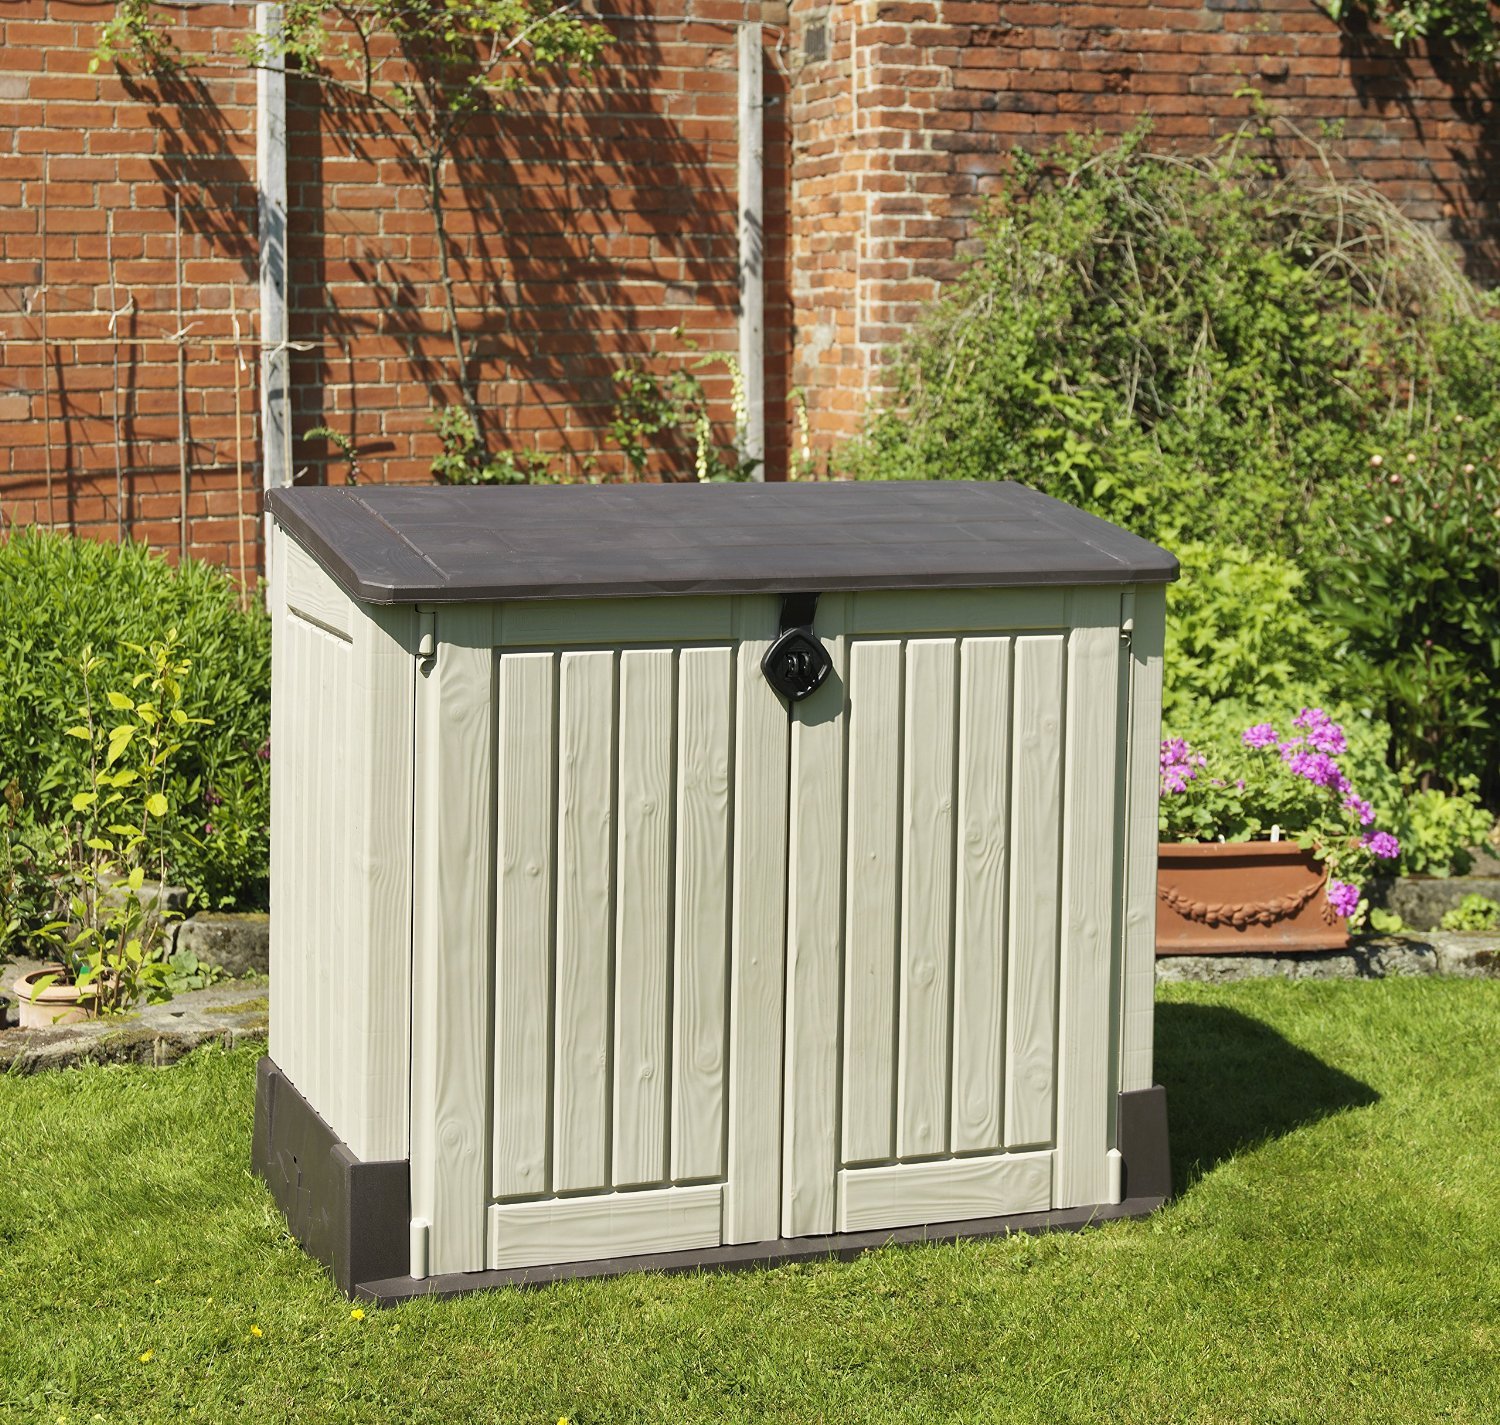 5 Genius Outdoor Storage Solutions | Stay At Home Mum